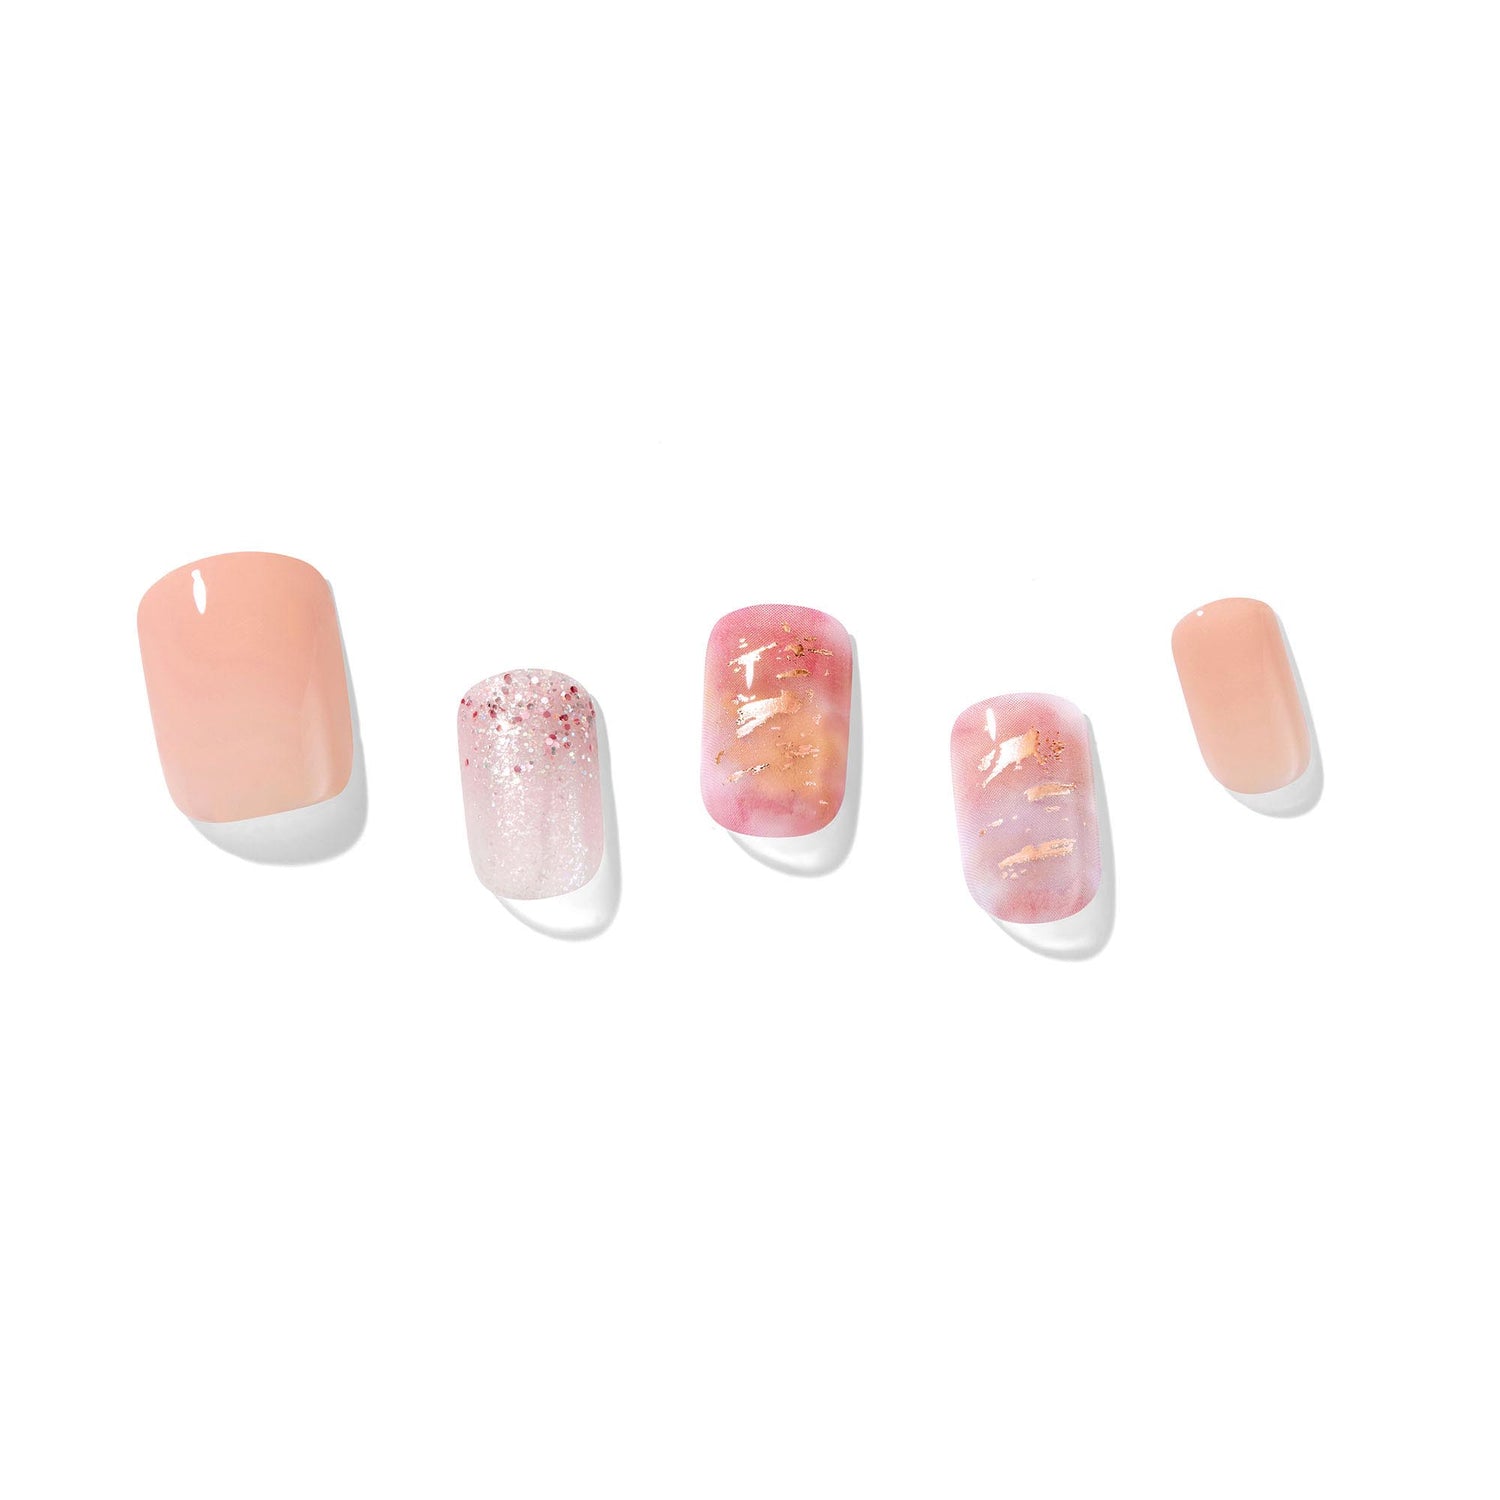 Medium length, square shape, glossy finish pink & nude pink artificial gel nails.